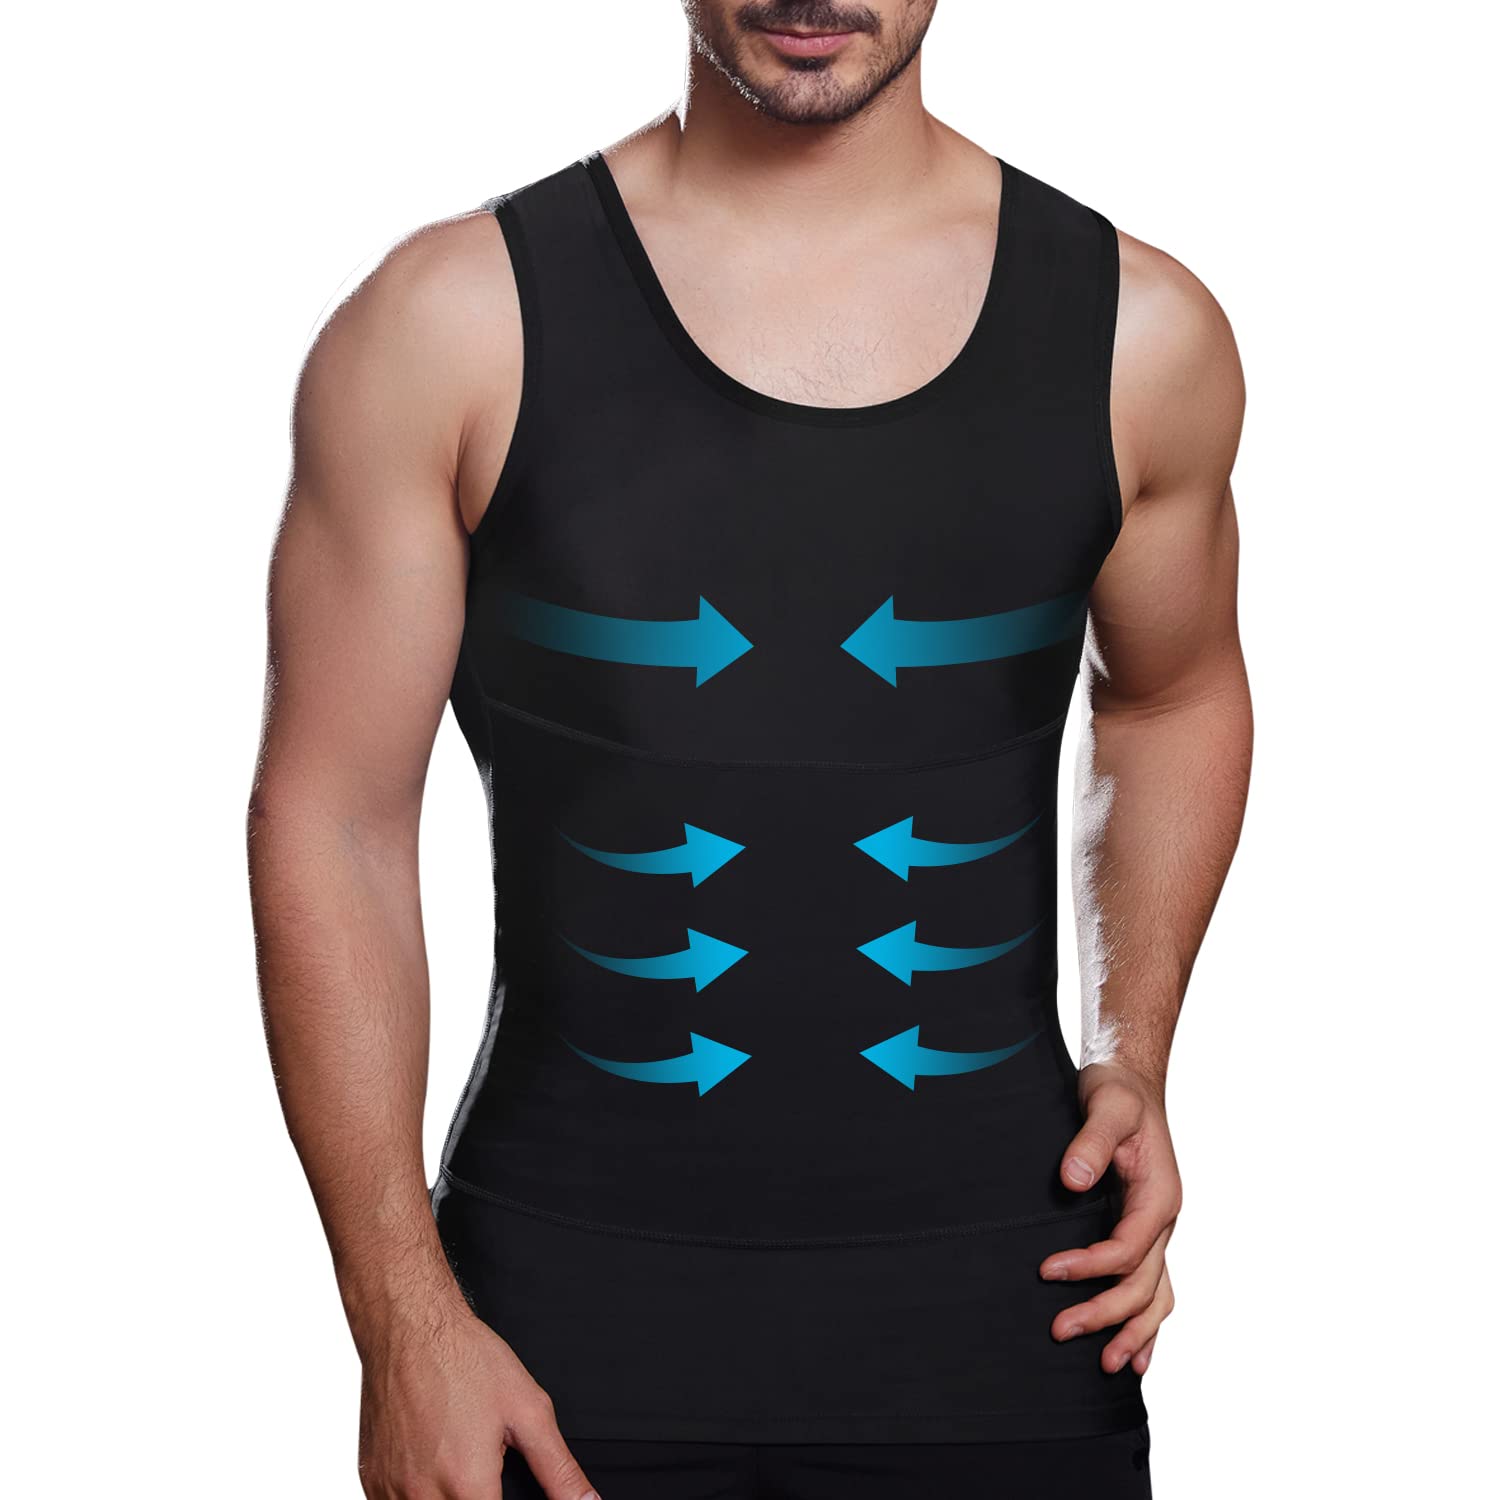 Mens Body Shaper Slimming Shirt Tummy Vest Compression Muscle Tank